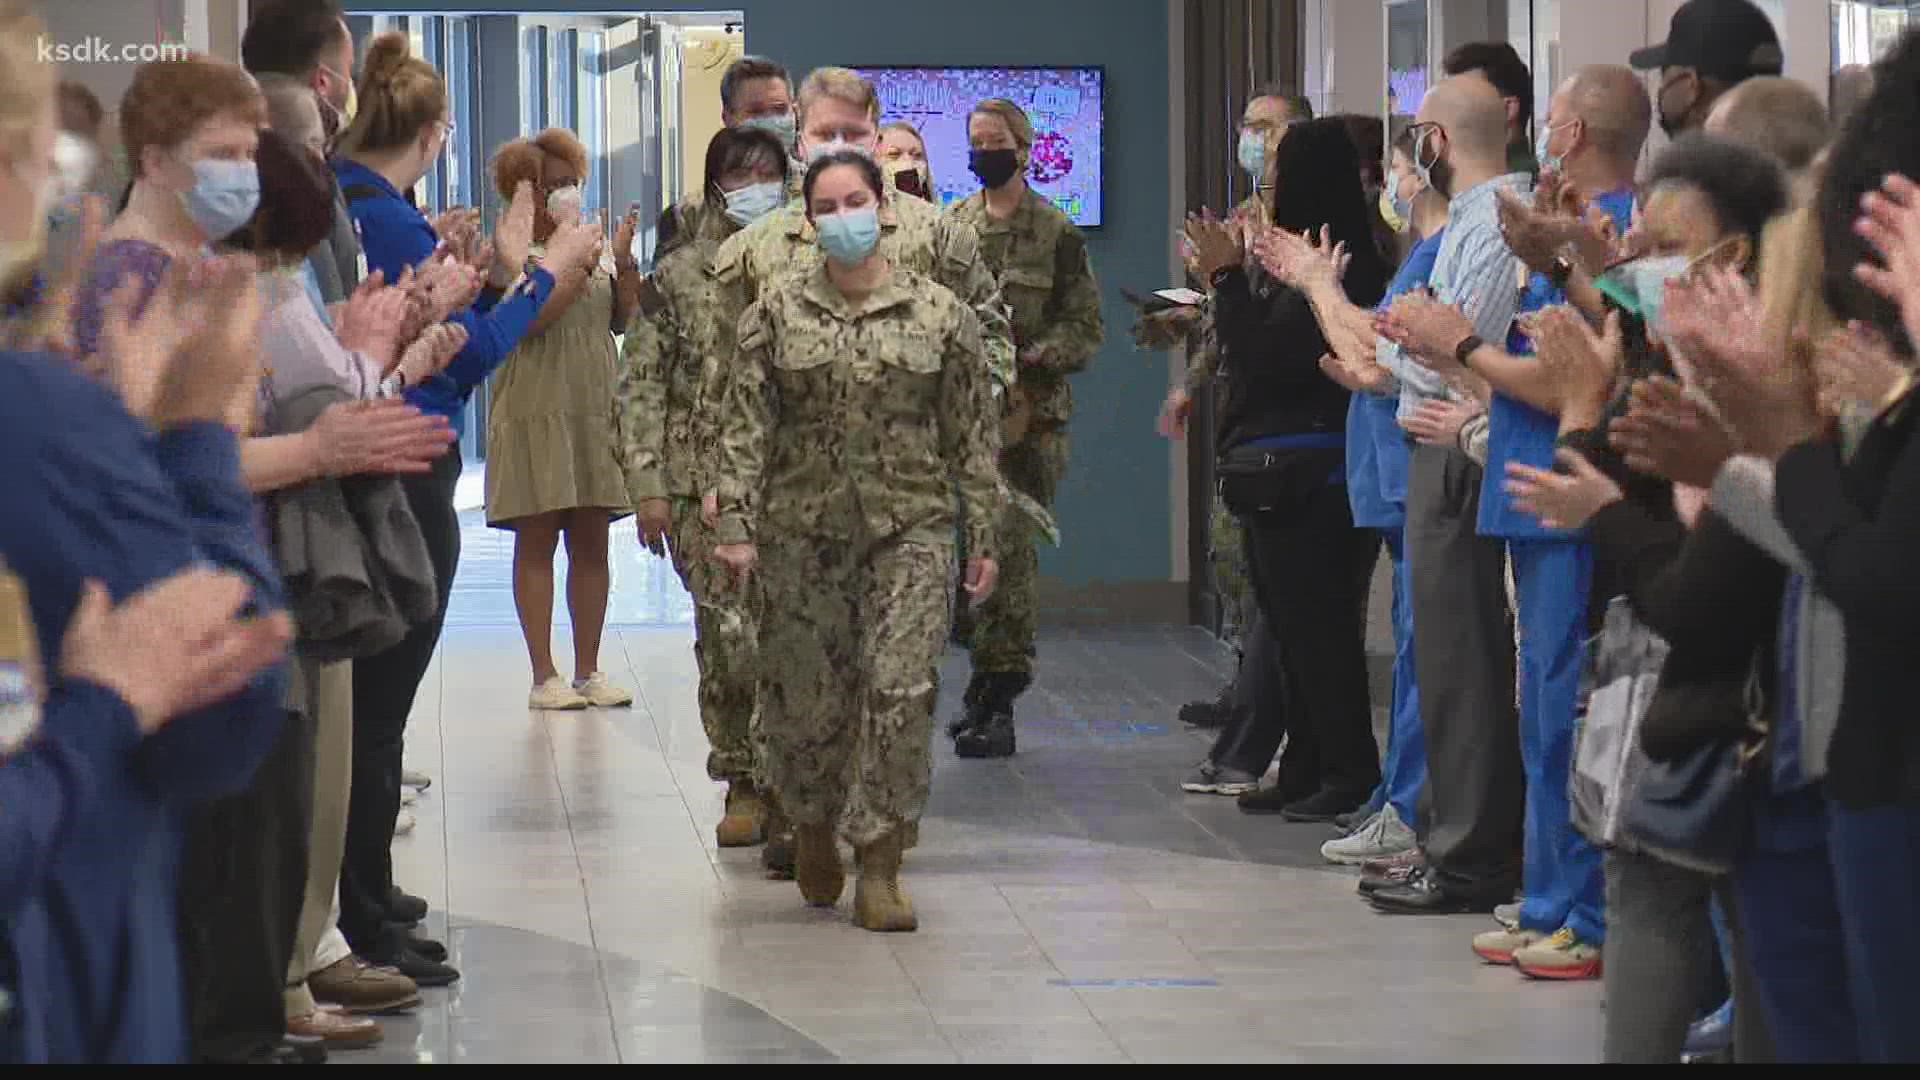 The Christian Hospital staff lined the hallway and cheered the team, saying "thank you" as they left.